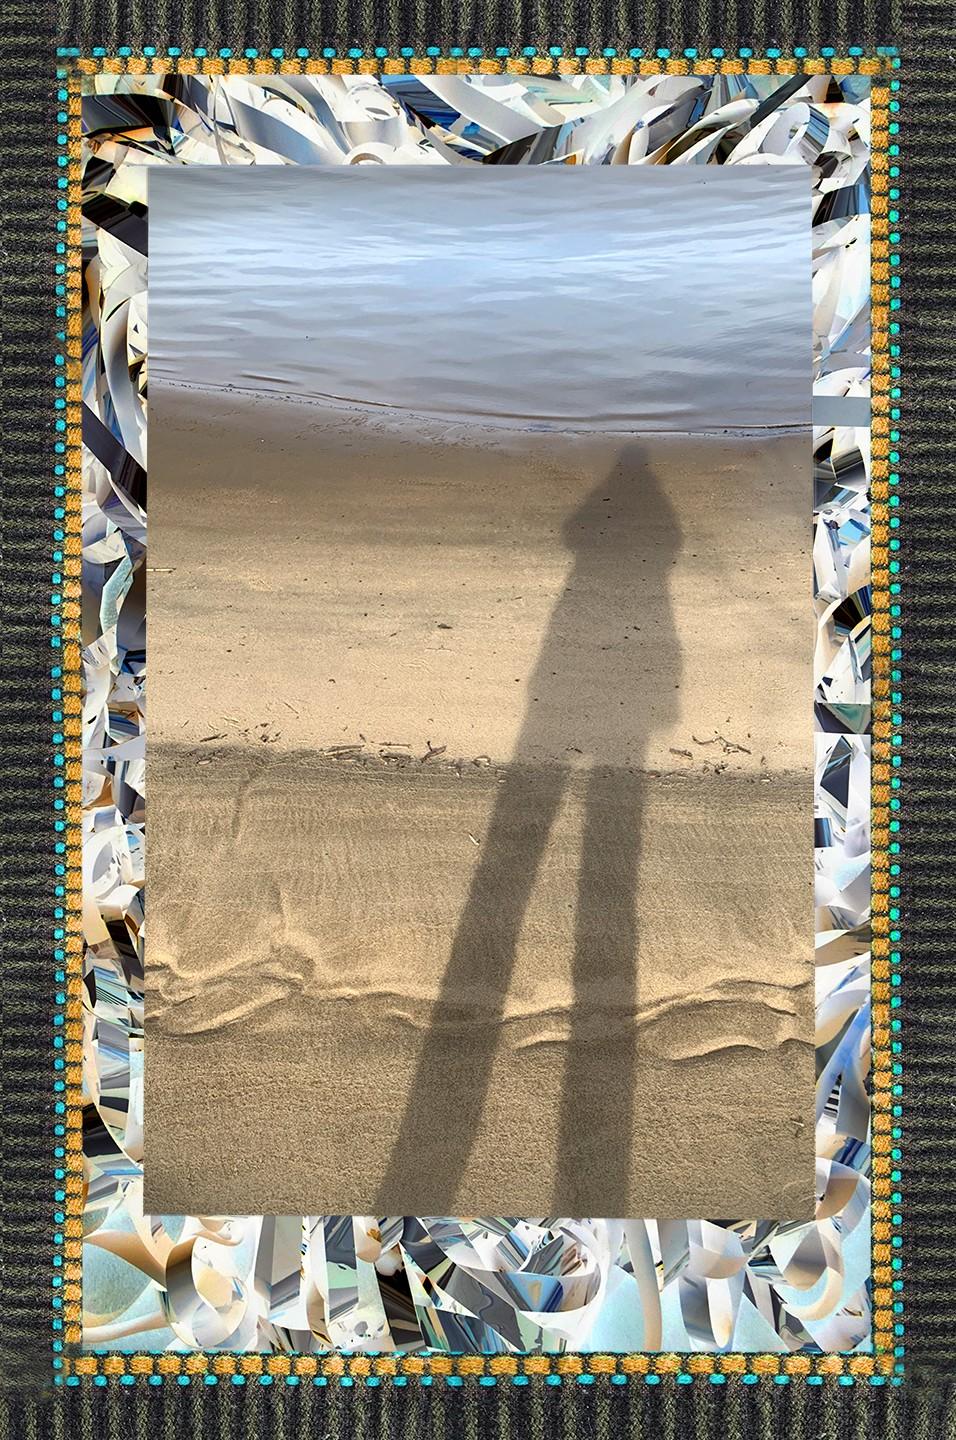 Robin Botie of Ithaca, New York, photoshops her shadow on a beach in illustrating her grief journey to Australia to scatter her daughter's ashes.